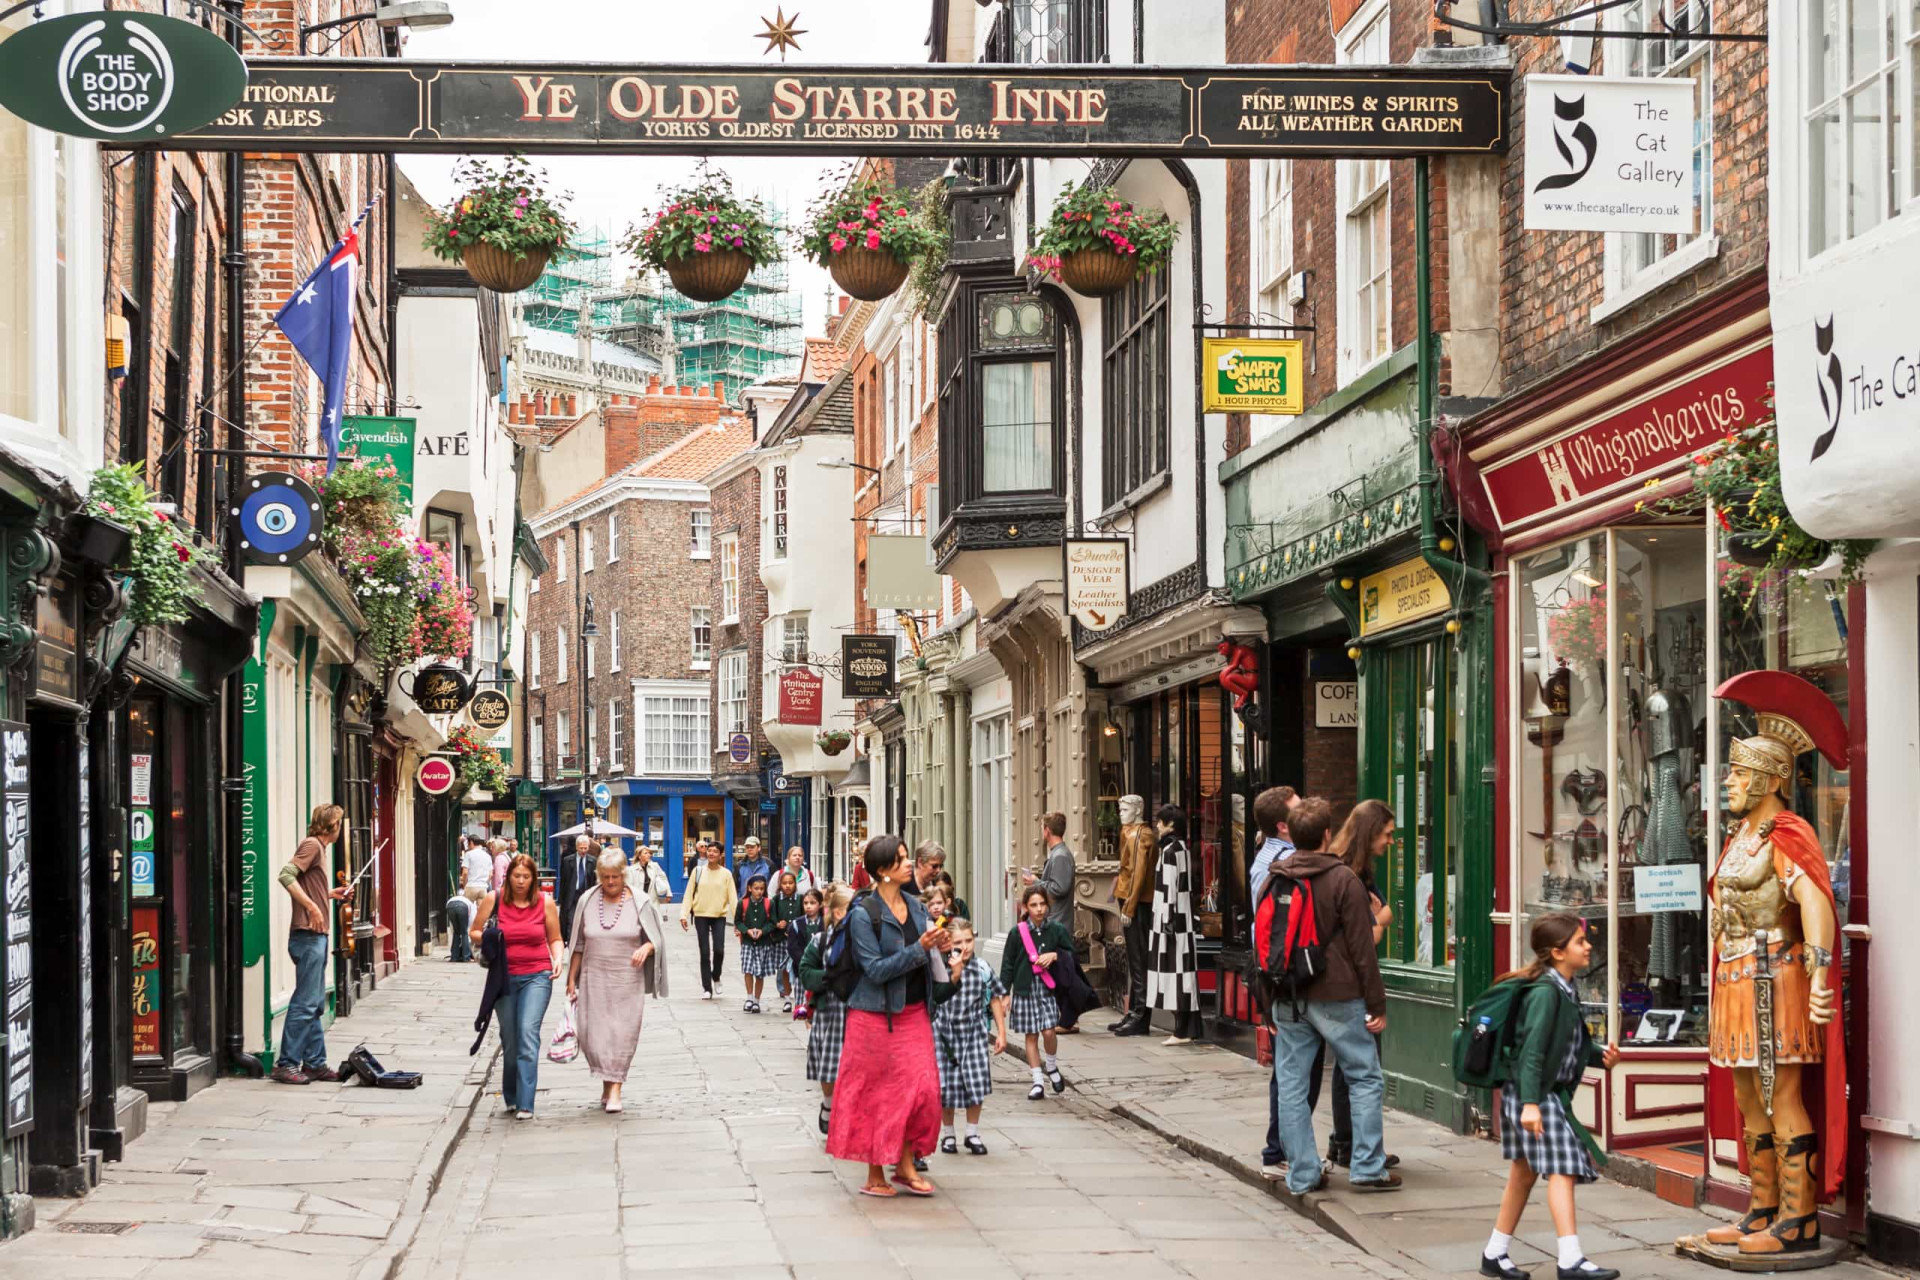 <p>The city of Vikings, York is great fun to visit with kids. The city's history comes to life at attractions such as the Jorvik Viking Center and the bloodthirsty York Dungeon, and there's a major rail museum where kids can admire centuries-old carriages used by royalty. </p><p>You may also like:<a href="https://www.starsinsider.com/n/318193?utm_source=msn.com&utm_medium=display&utm_campaign=referral_description&utm_content=481299v1en-en"> The coolest and craziest cable car rides in the world</a></p>